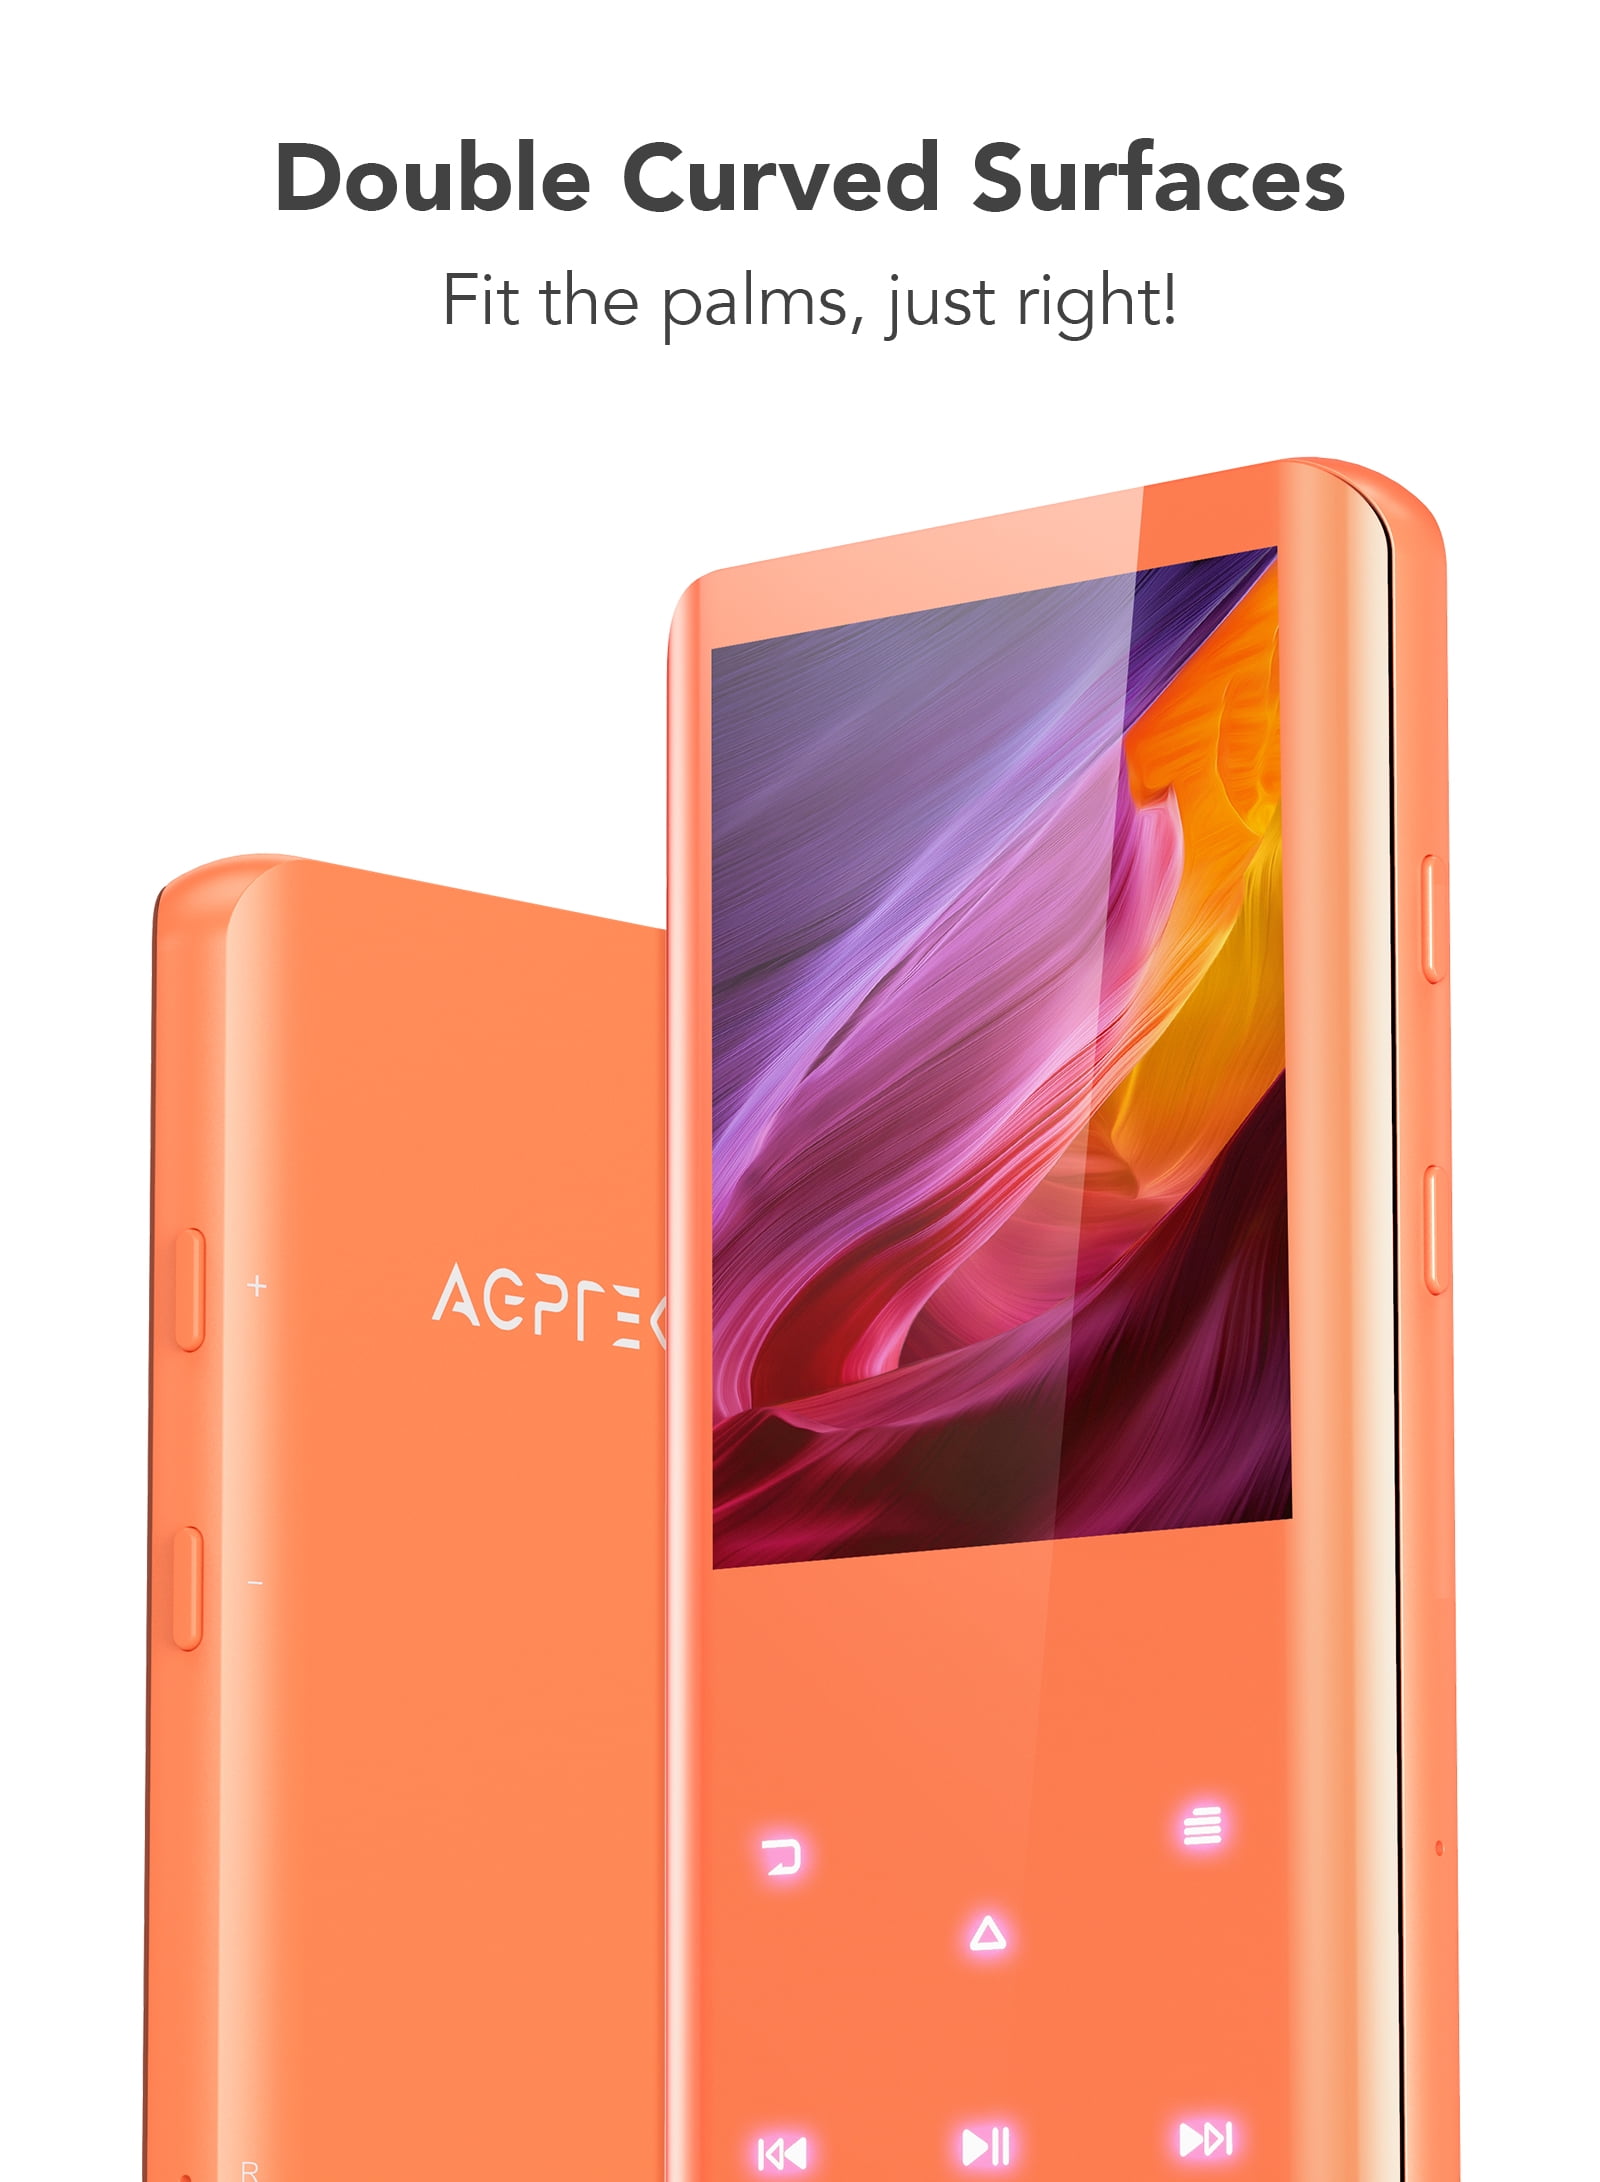 MP3 Player with Bluetooth 5.3, AGPTEK A19X 2.4 Curved Screen Portable  Music Player with Speaker Lossless Sound with FM Radio, Voice Recorder,  Built